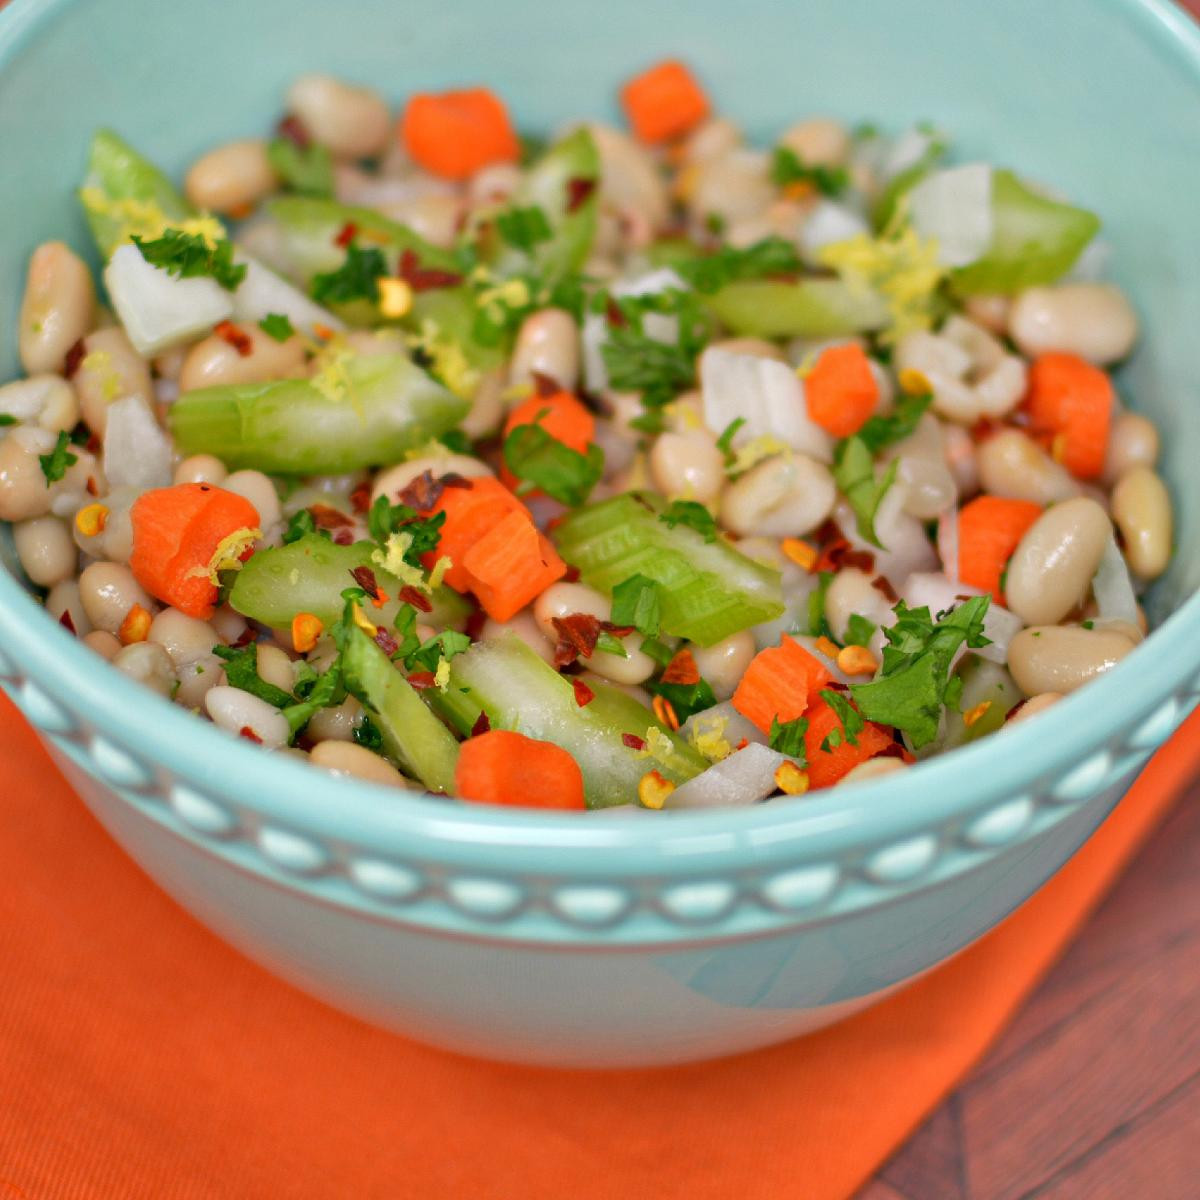 Healthy Side Dishes
 9 Healthy Side Dishes From Fresh Veggies